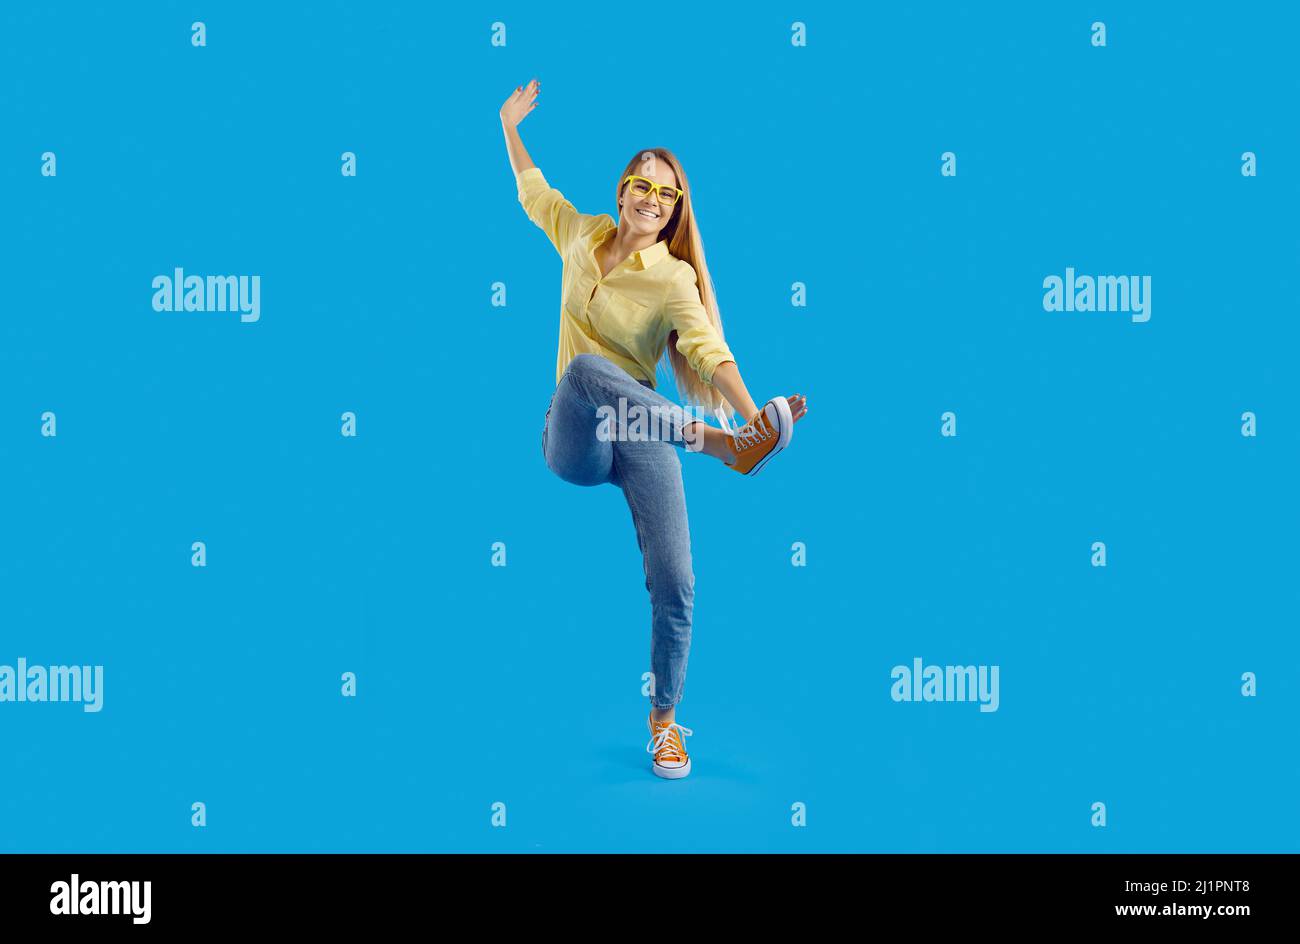 Cheerful crazy young woman having fun showing funny movements on light blue background. Stock Photo